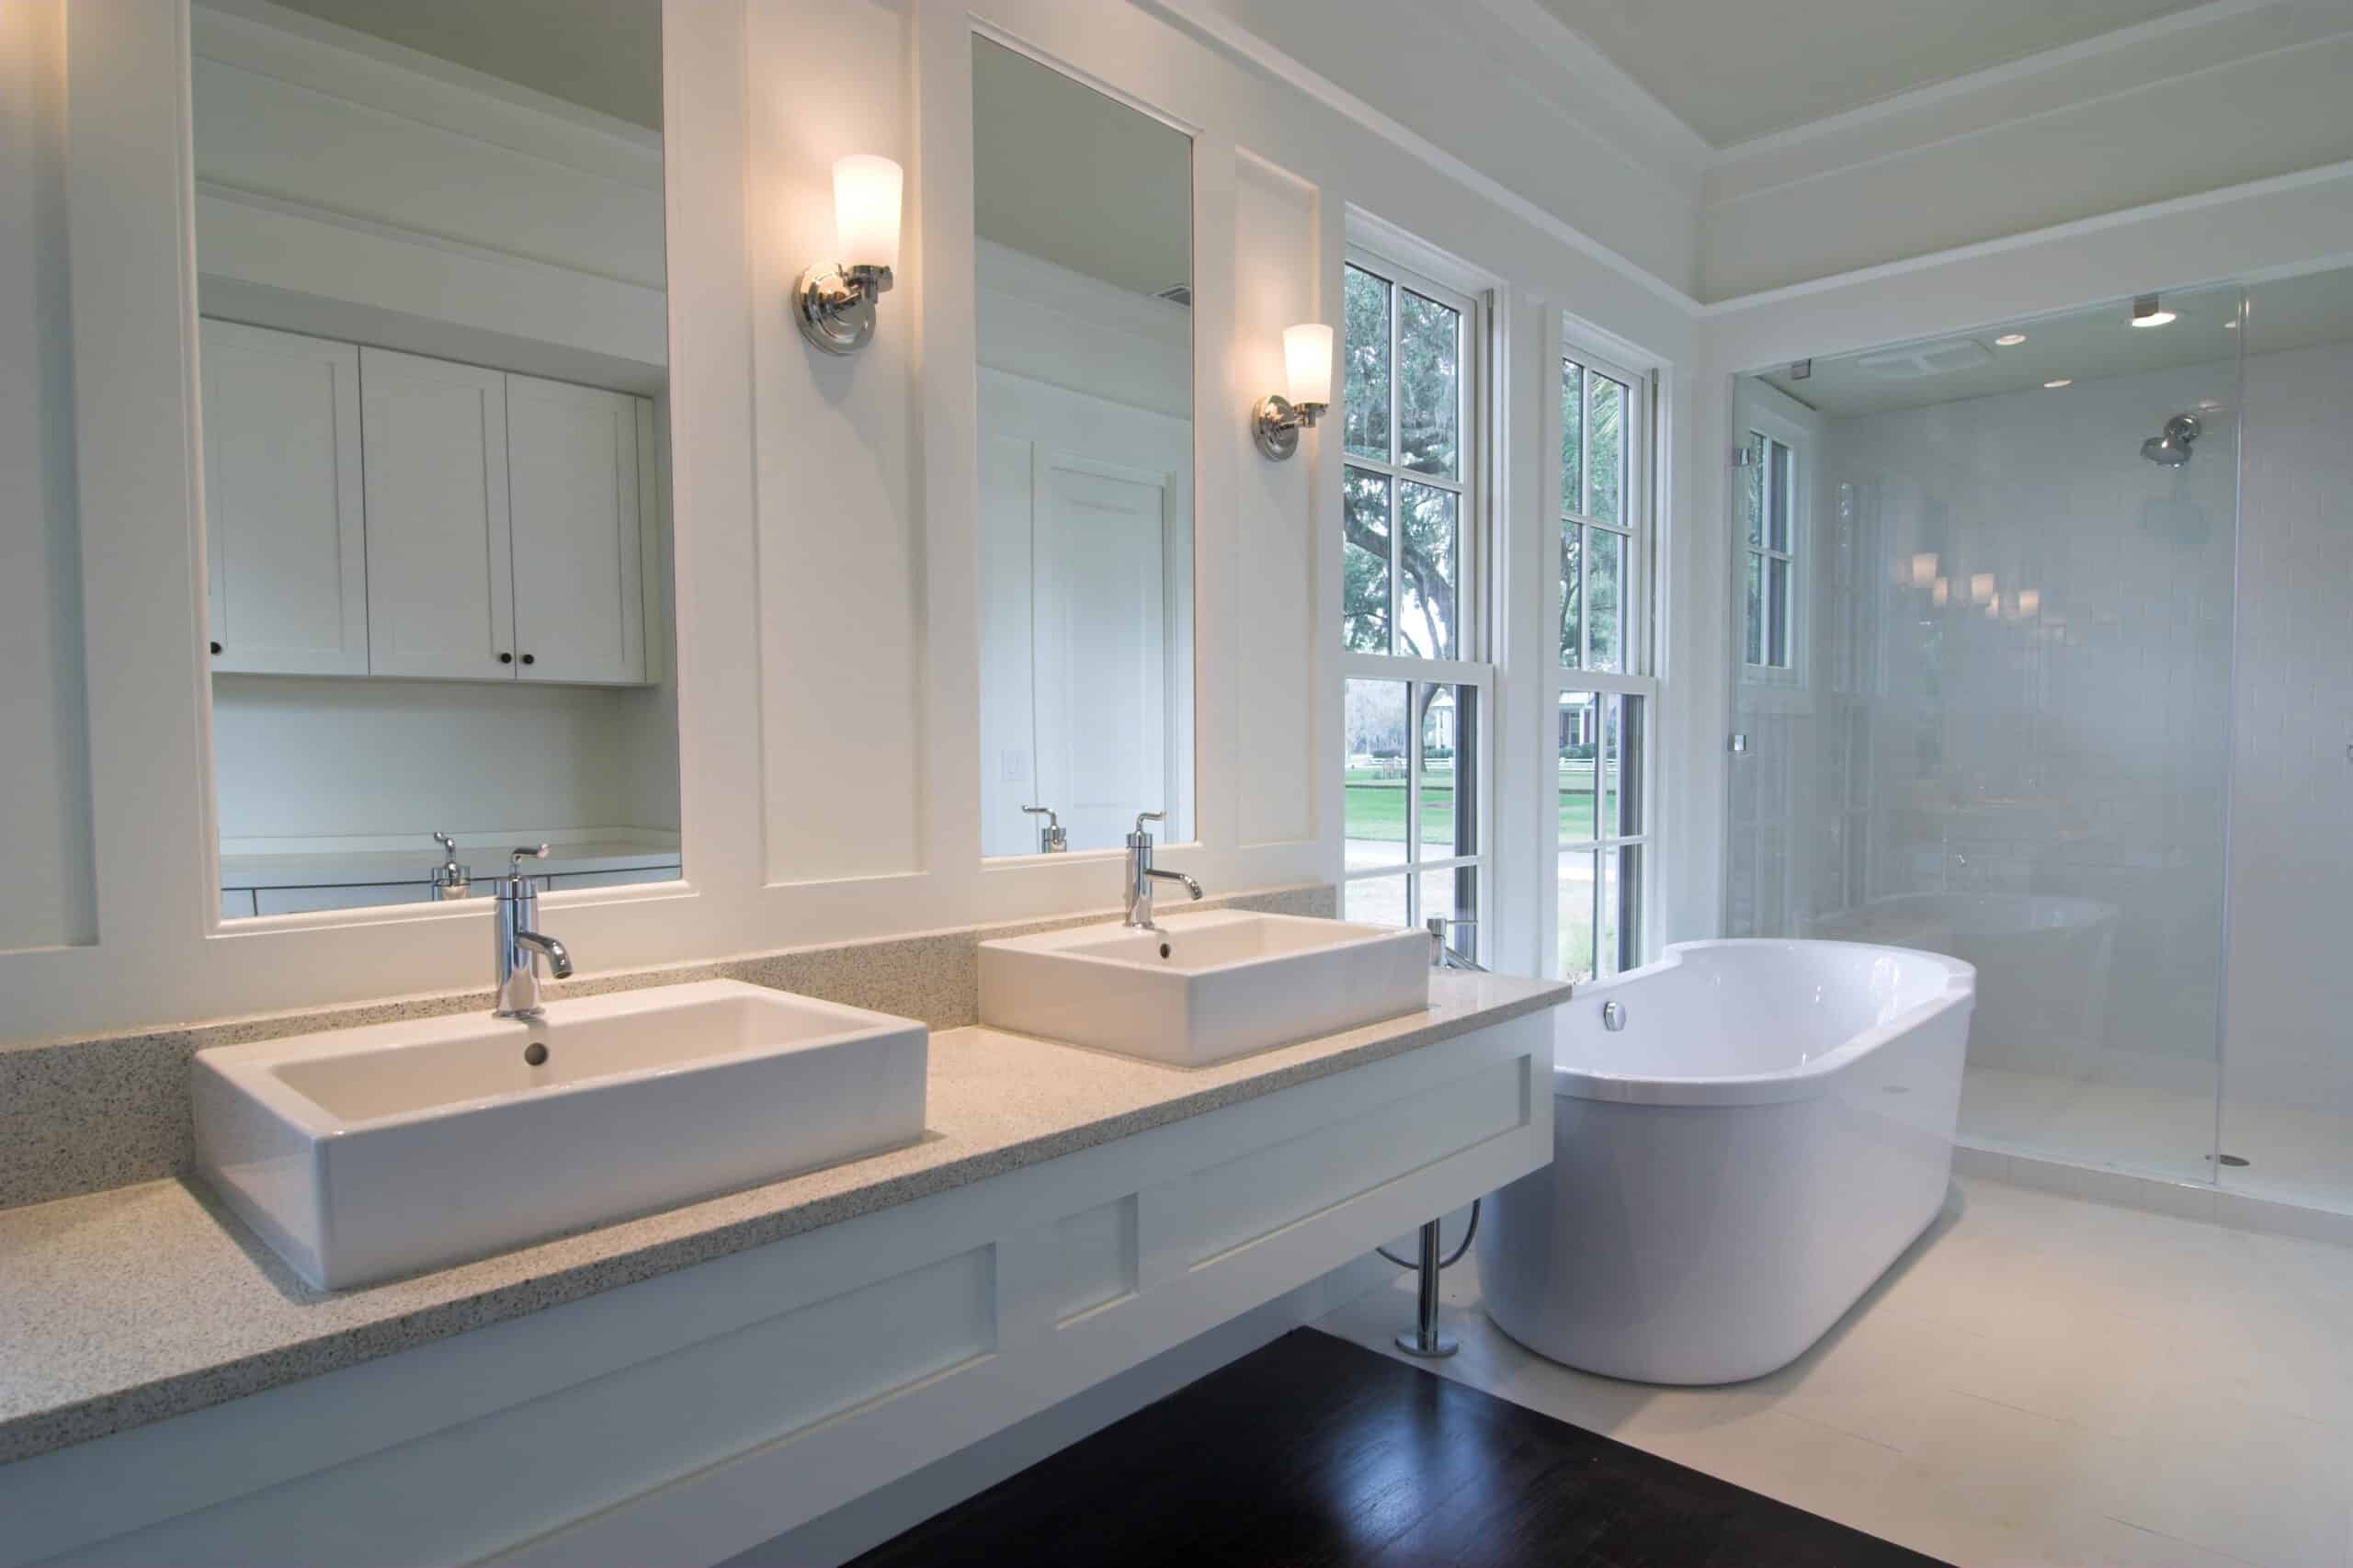 bathroom, white, elegant, modern, clean, sink, double, tub, bathtub, bath, shower, glass, counter, inside, interior, home, house, fixture, remodel, expensive, wood, cabinet, faucet, wash, window, glass, chrome